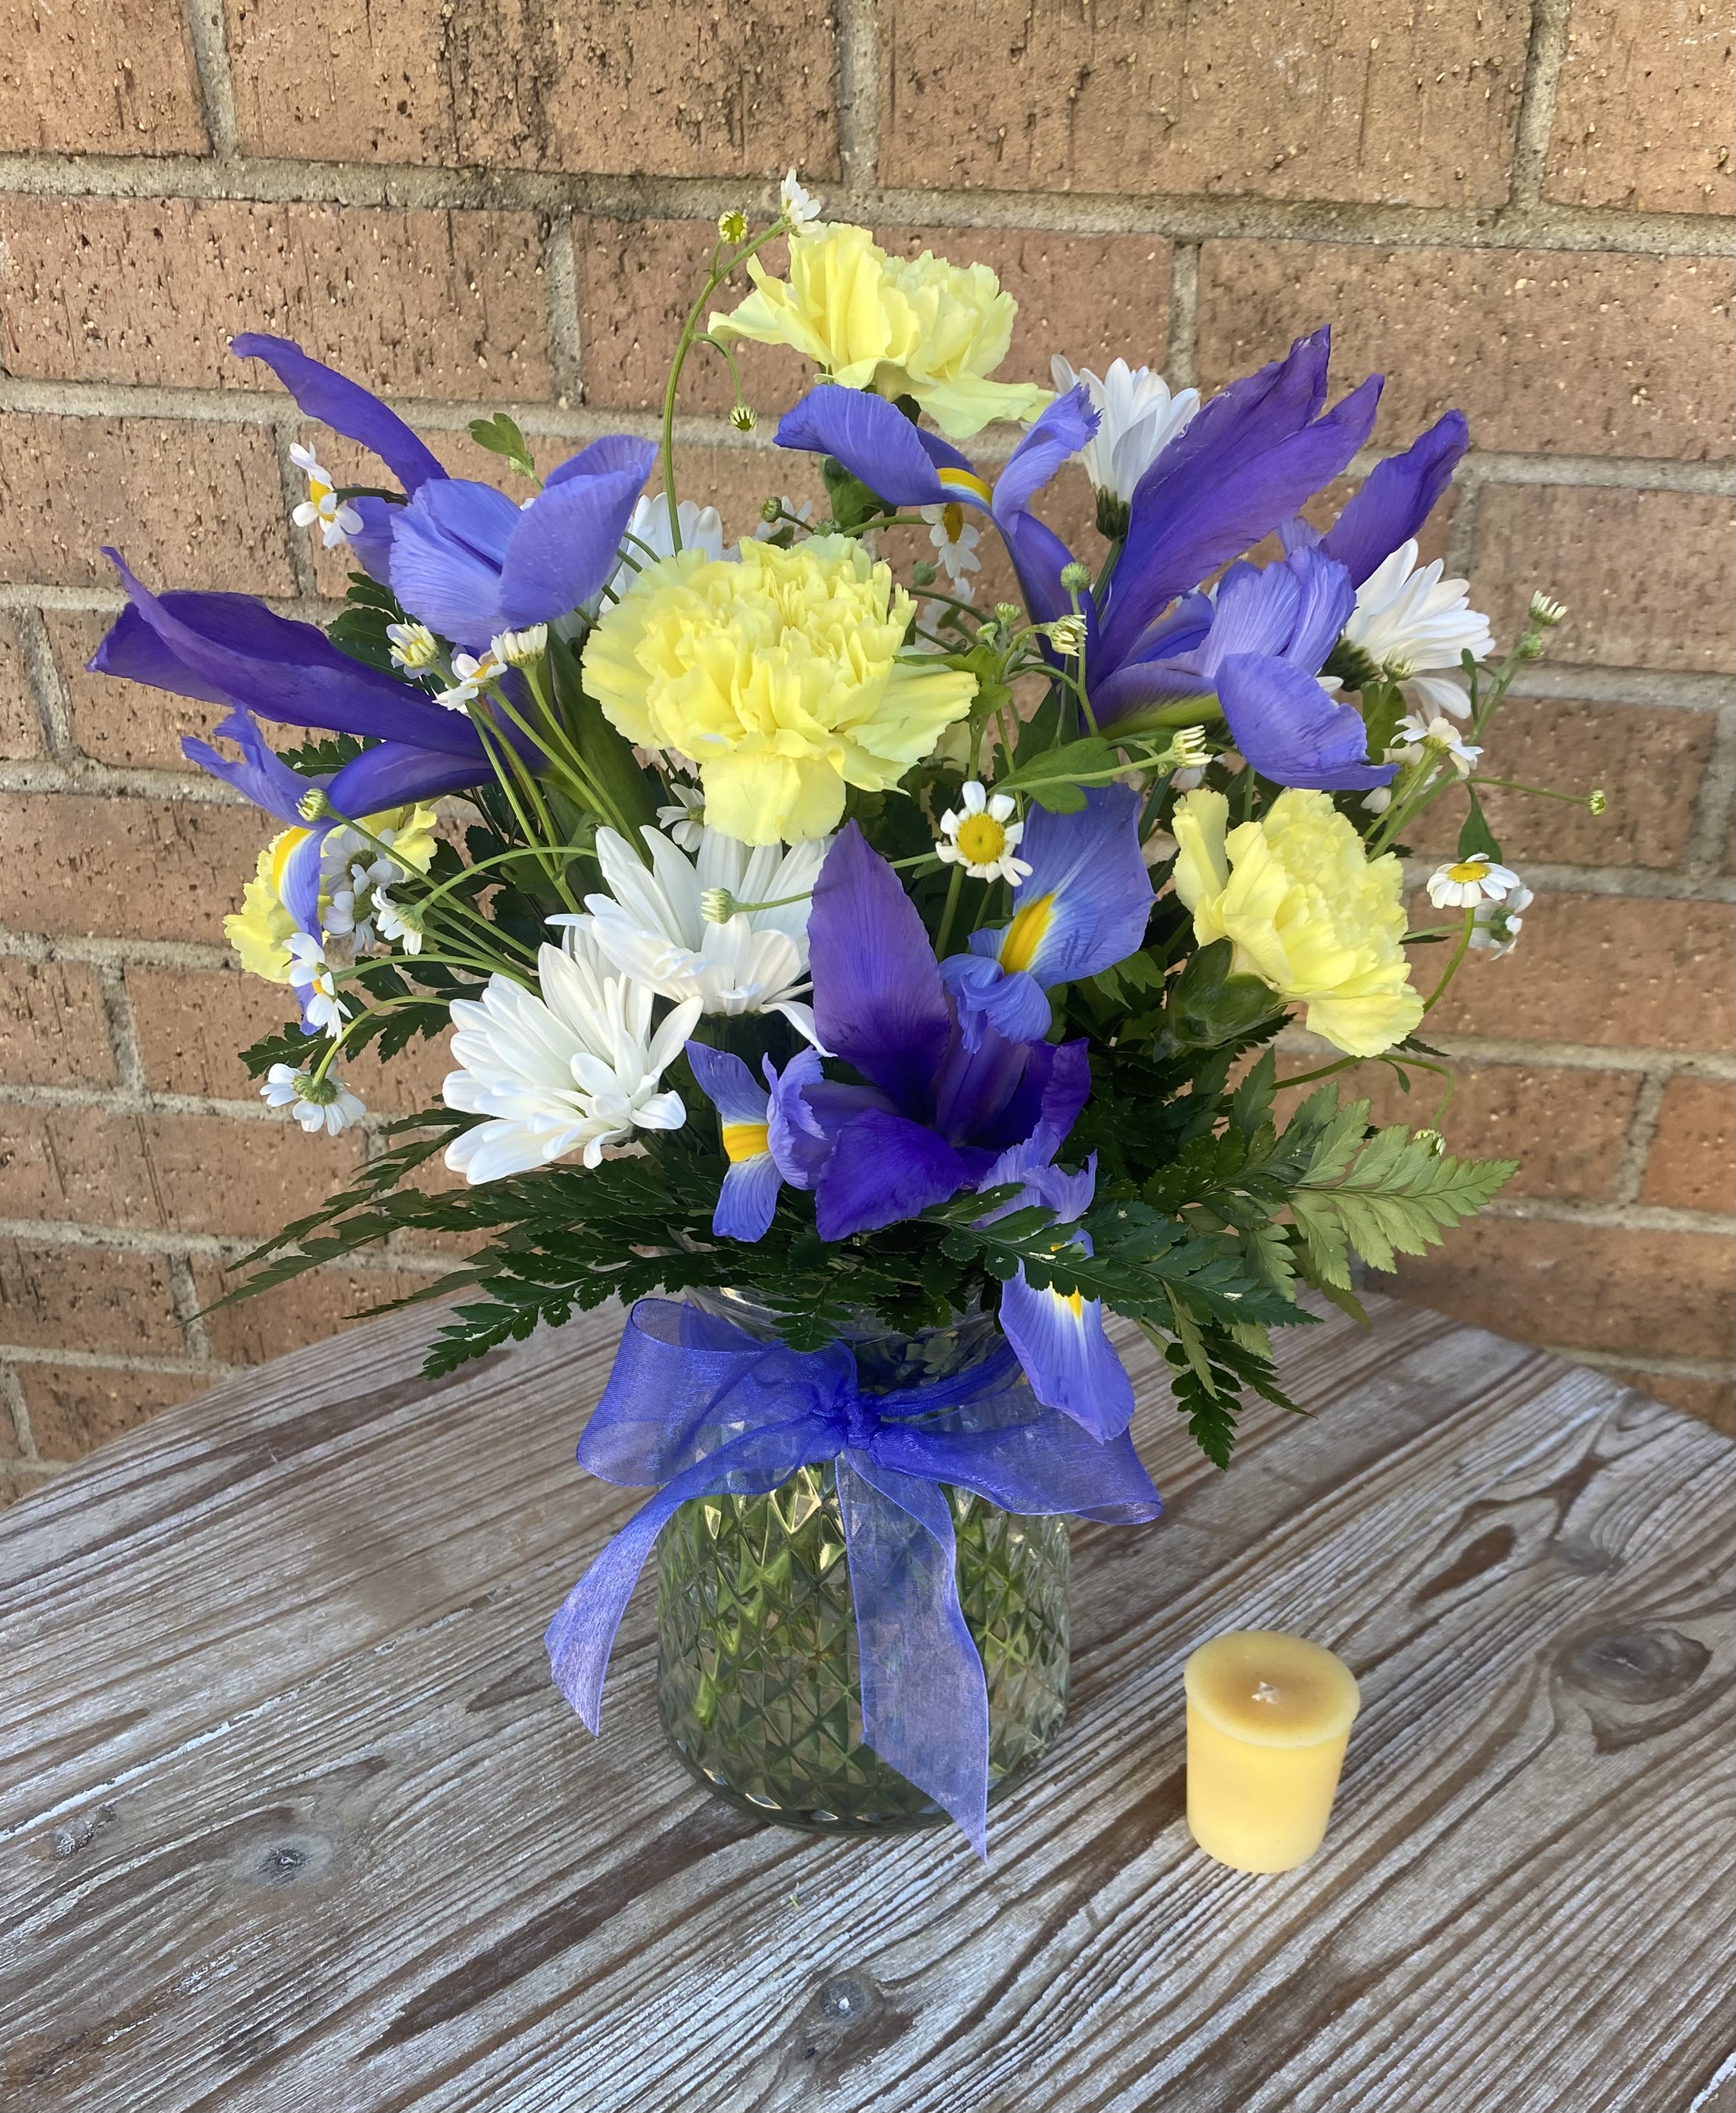 Blue Skies - Make someone's day by sending them the perfect &quot;Blue Skies&quot; arrangement. Perfect for any occasion!  (Candle not included with purchase. It is used to show size of arrangement only) 